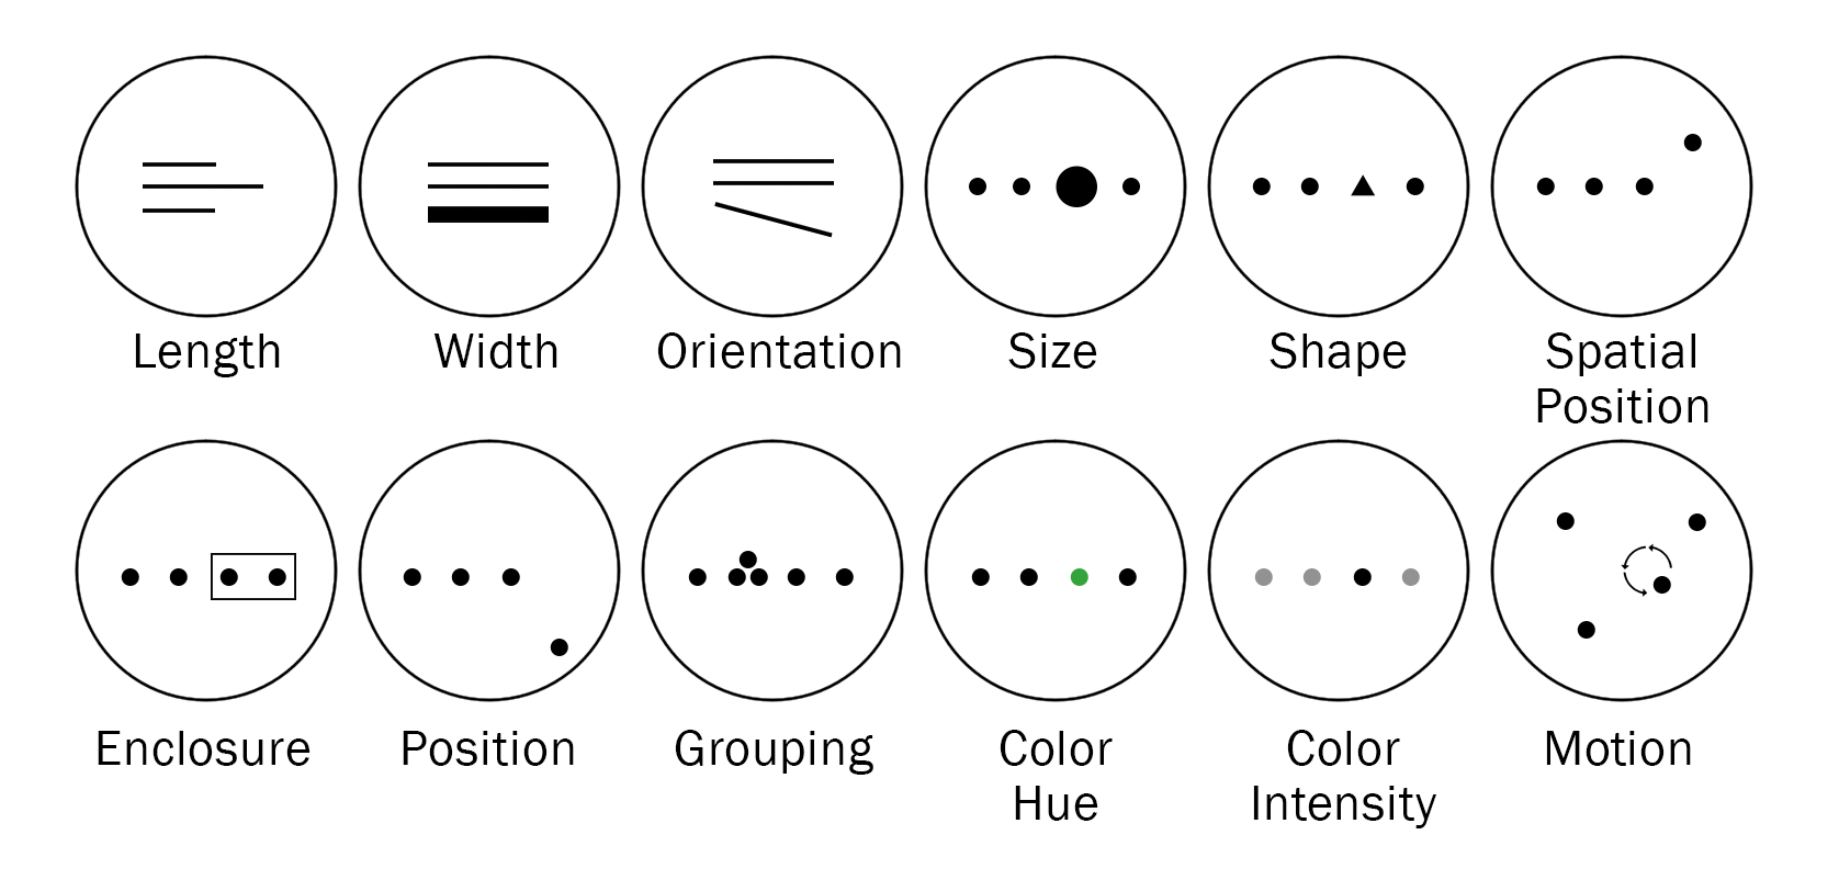 A dozen circles in two rows of 6, each one using very basic images with dots and lines to described labeled considerations. The list is: Length, Width, Orientation, Size, Shape, Spatial Position, Enclosure, Position, Grouping, Color Hue, Color Intensity, Motion.